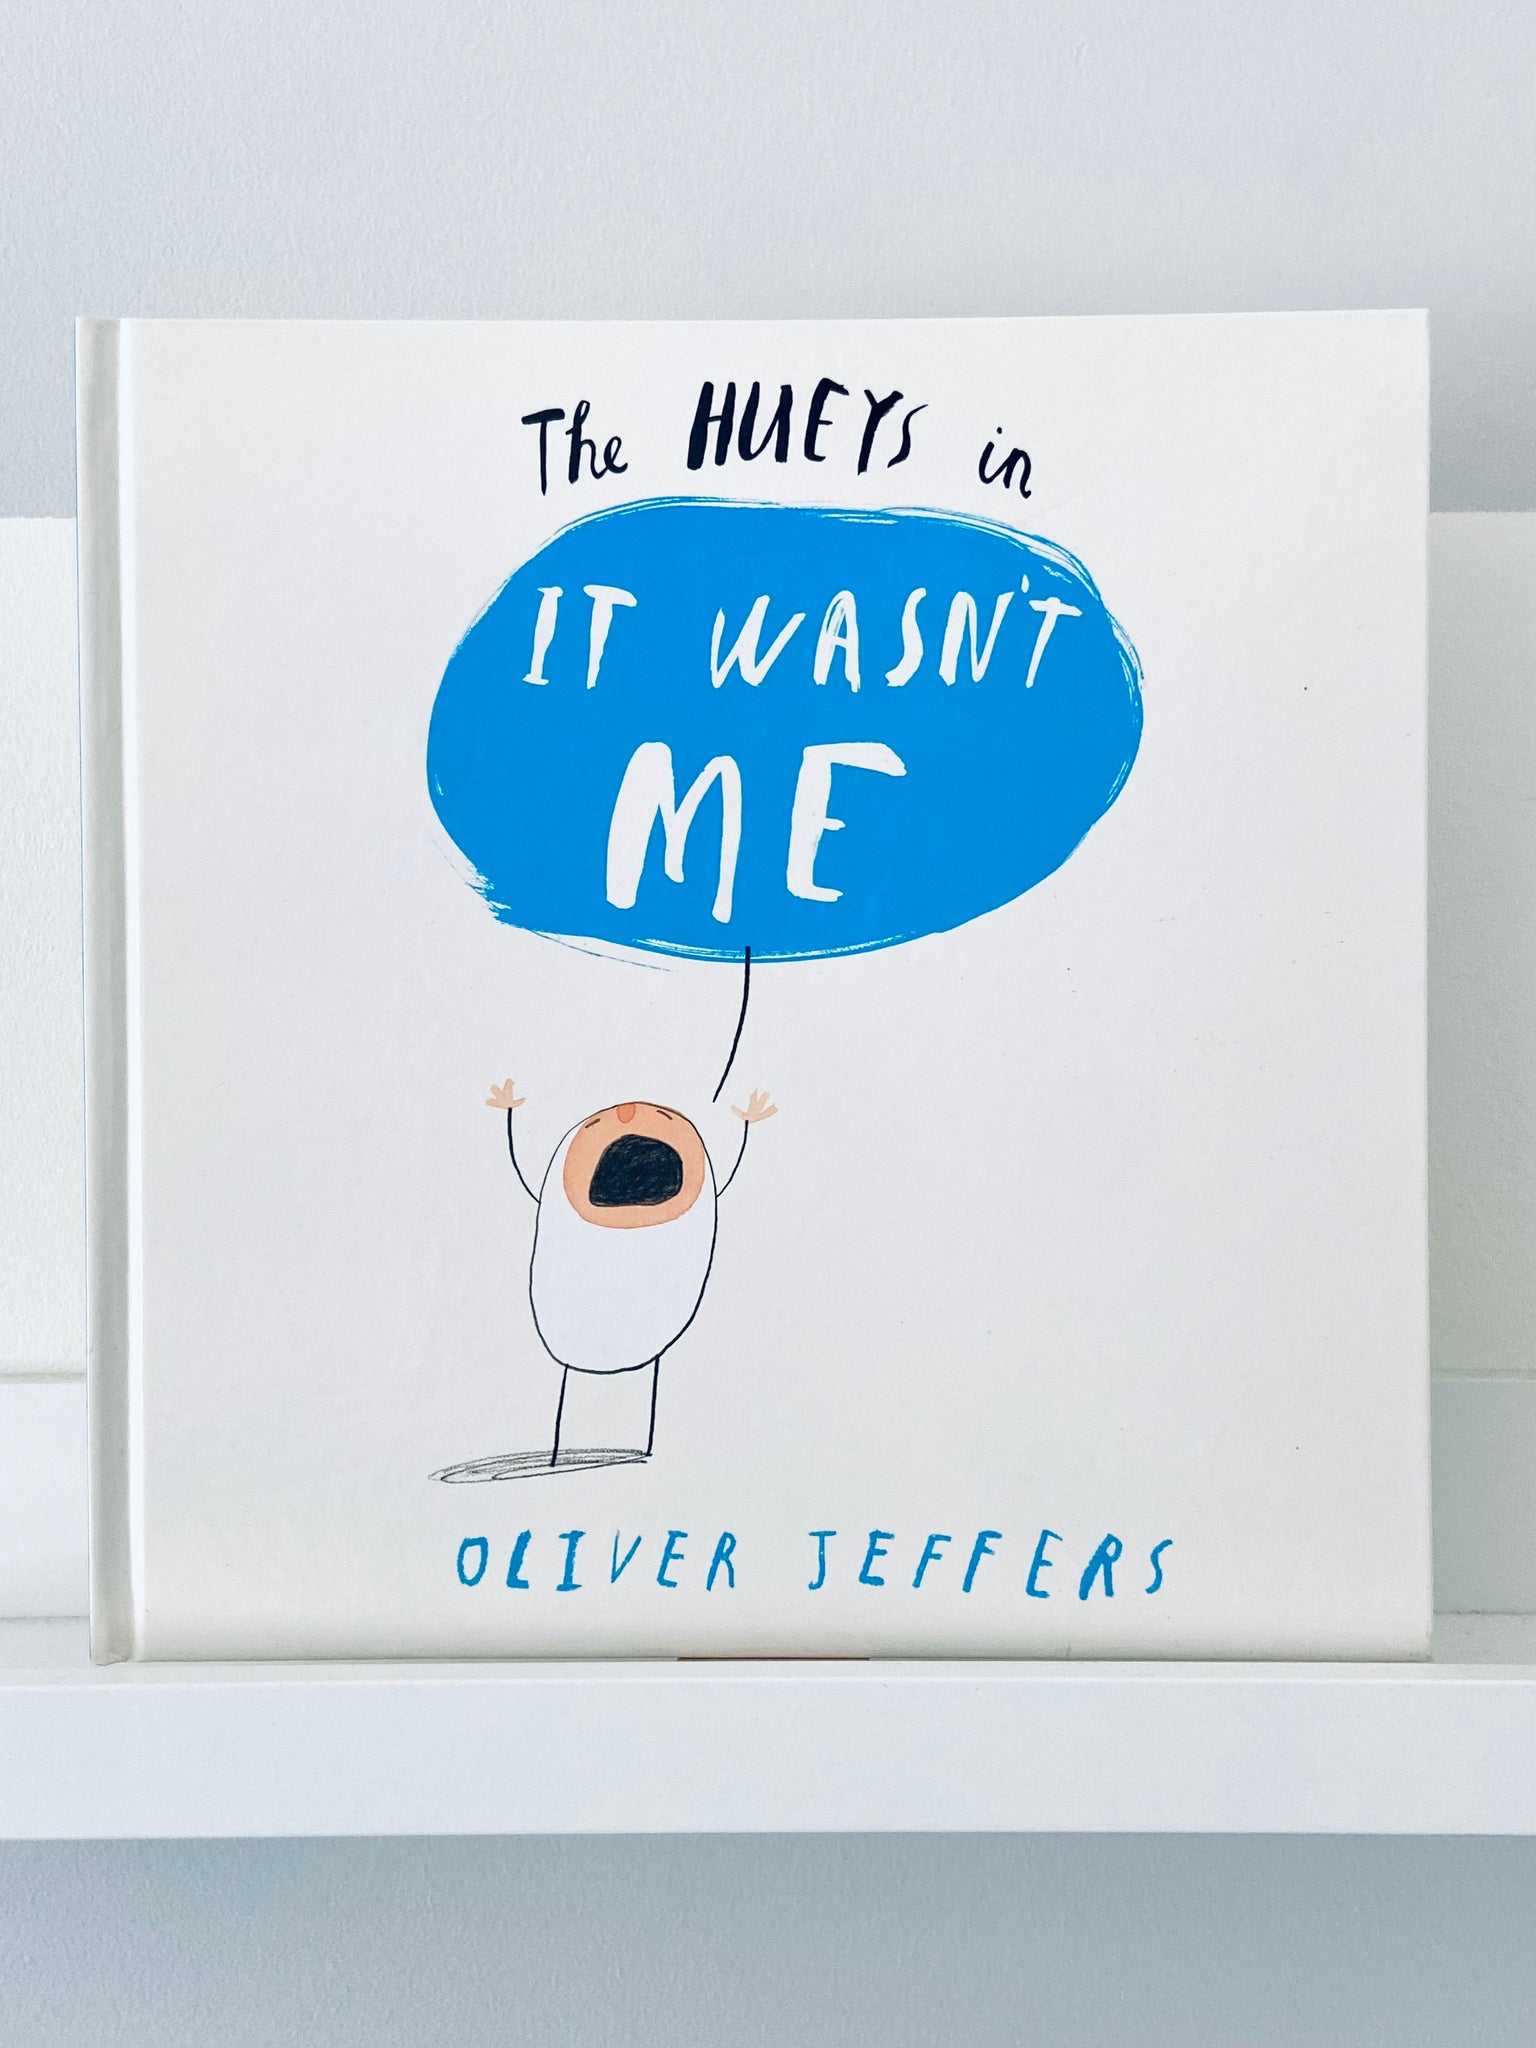 The Hueys In It Wasn’t Me | Oliver Jeffers